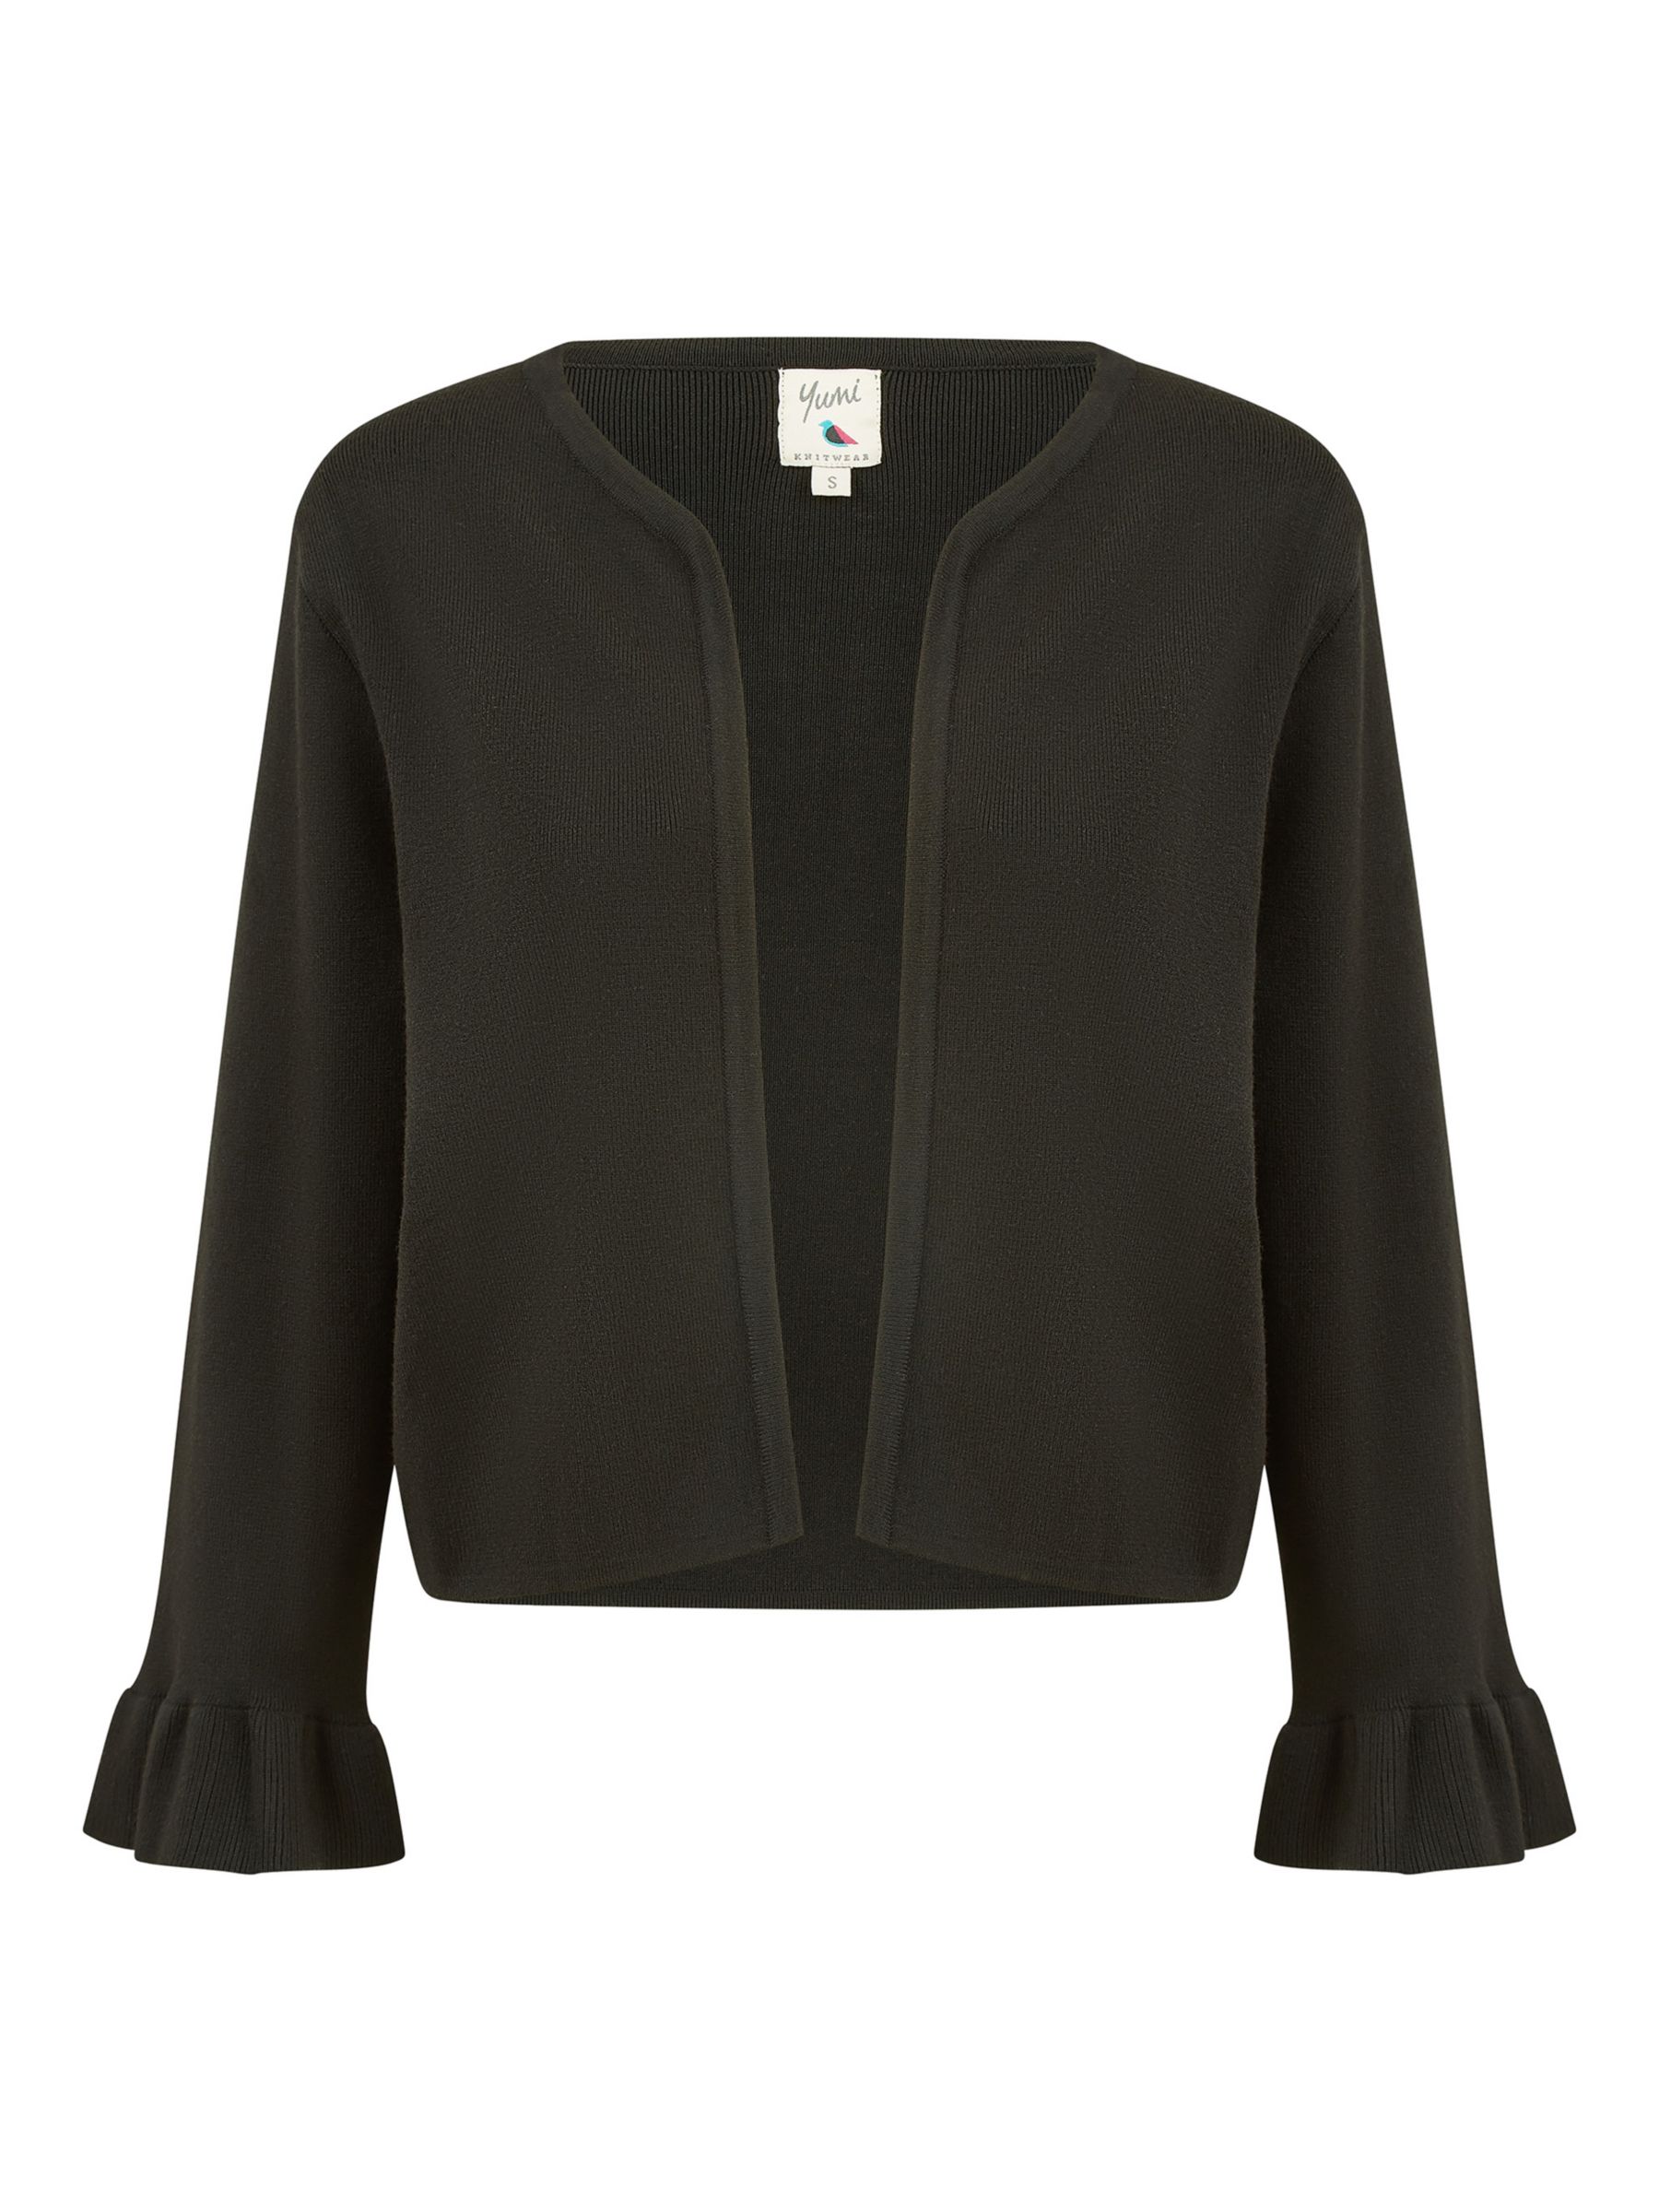 Buy Yumi Bell Sleeve Cropped Cardigan Online at johnlewis.com